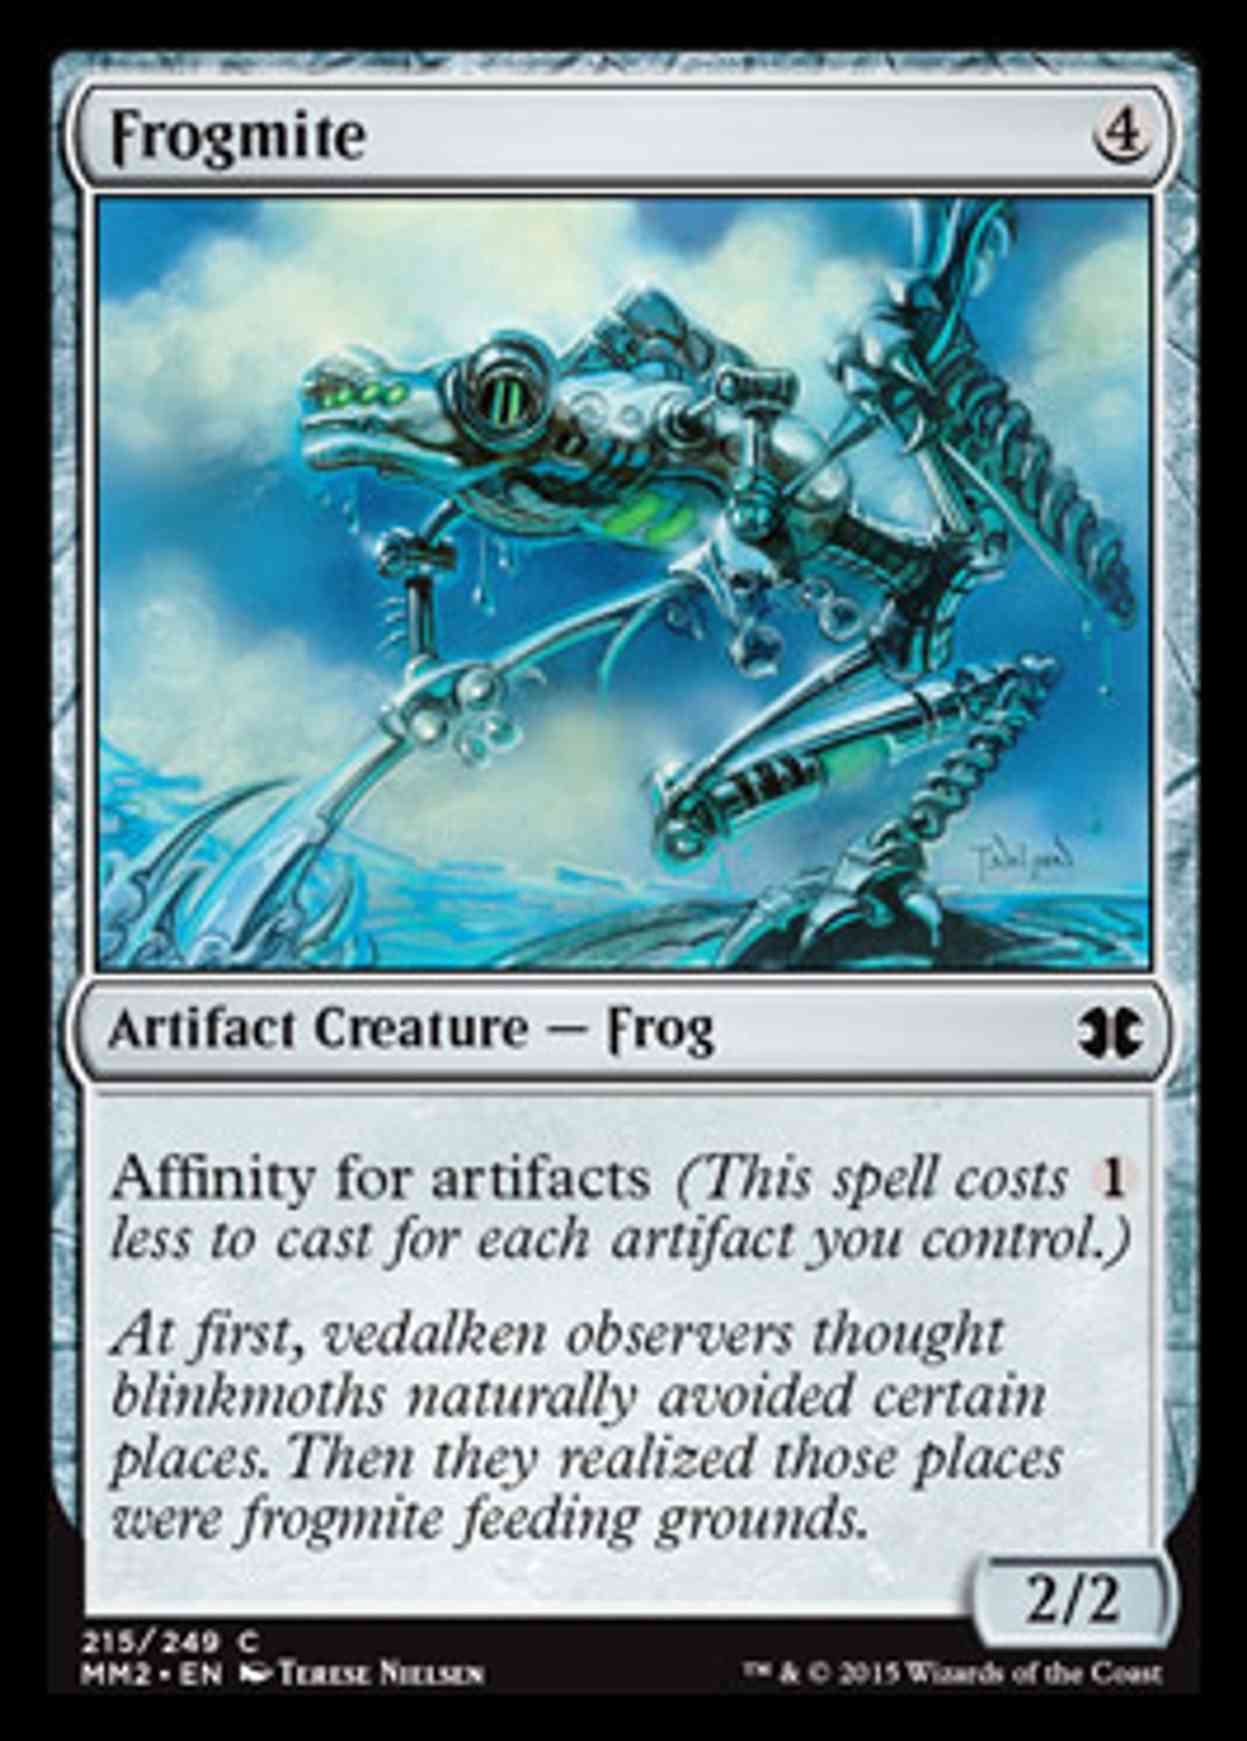 Frogmite magic card front